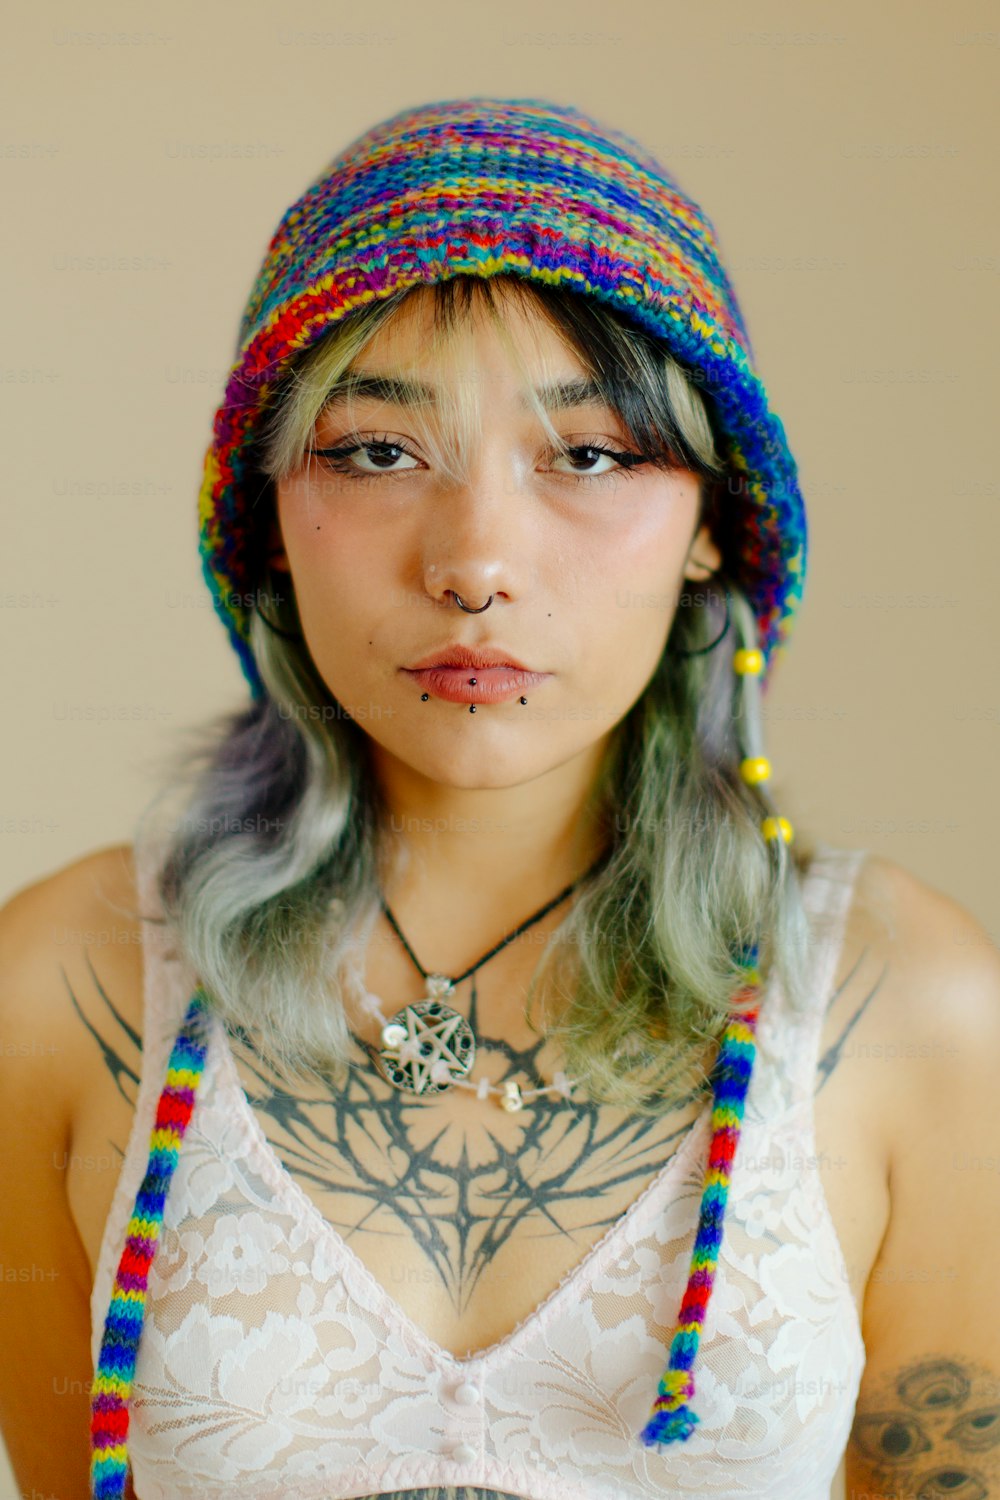 a woman with long hair wearing a colorful hat